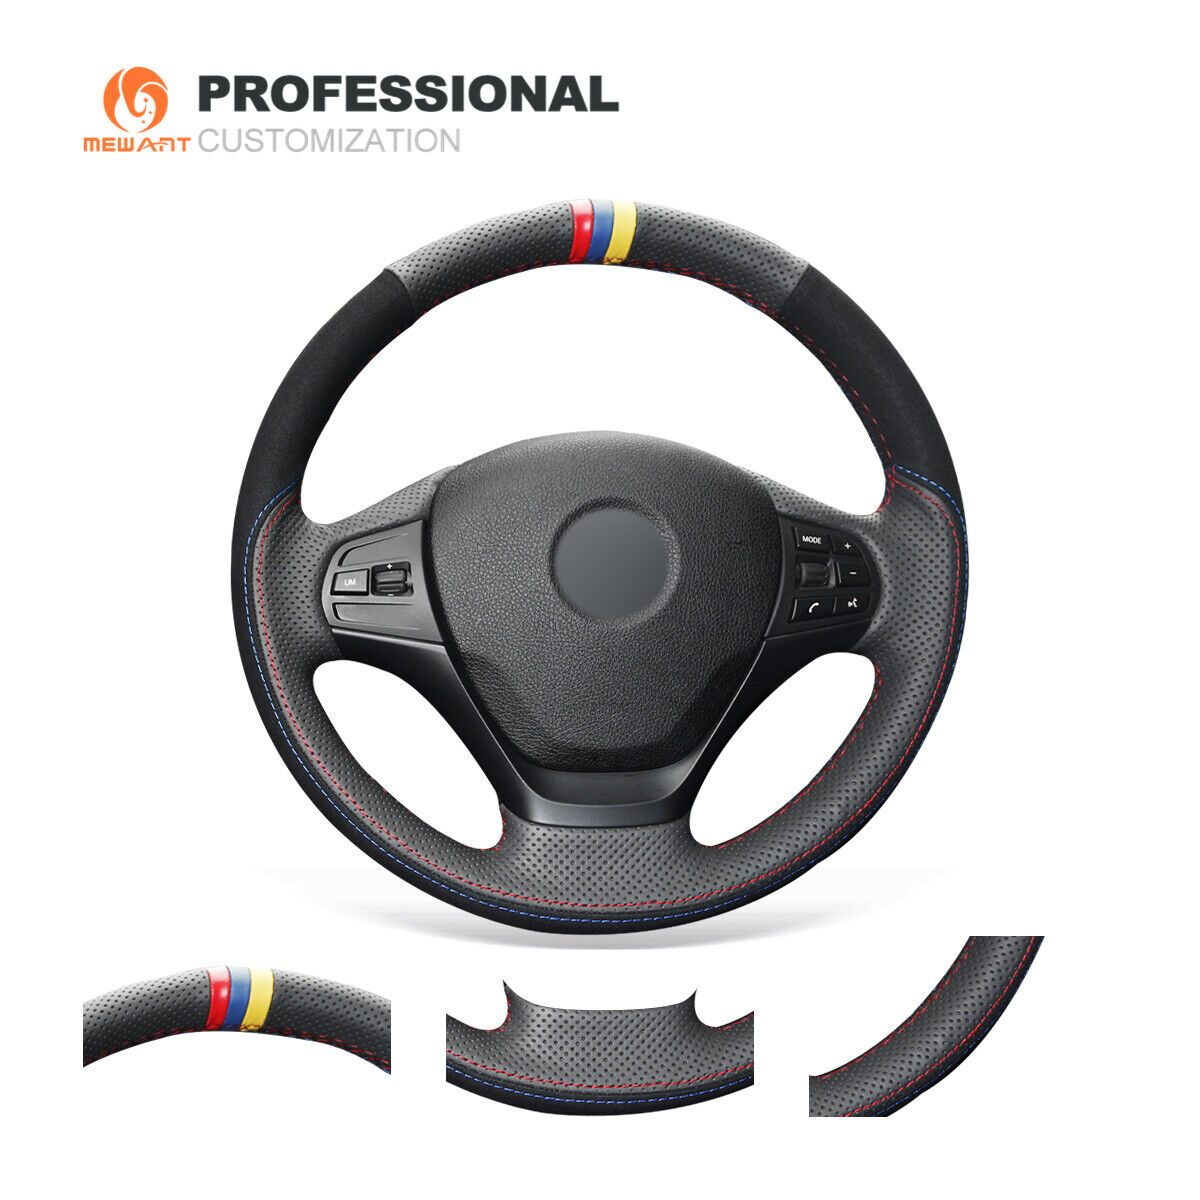 Genuine Leather Suede Steering Wheel Cover for BMW 3 Series F30 F34 2012-2018